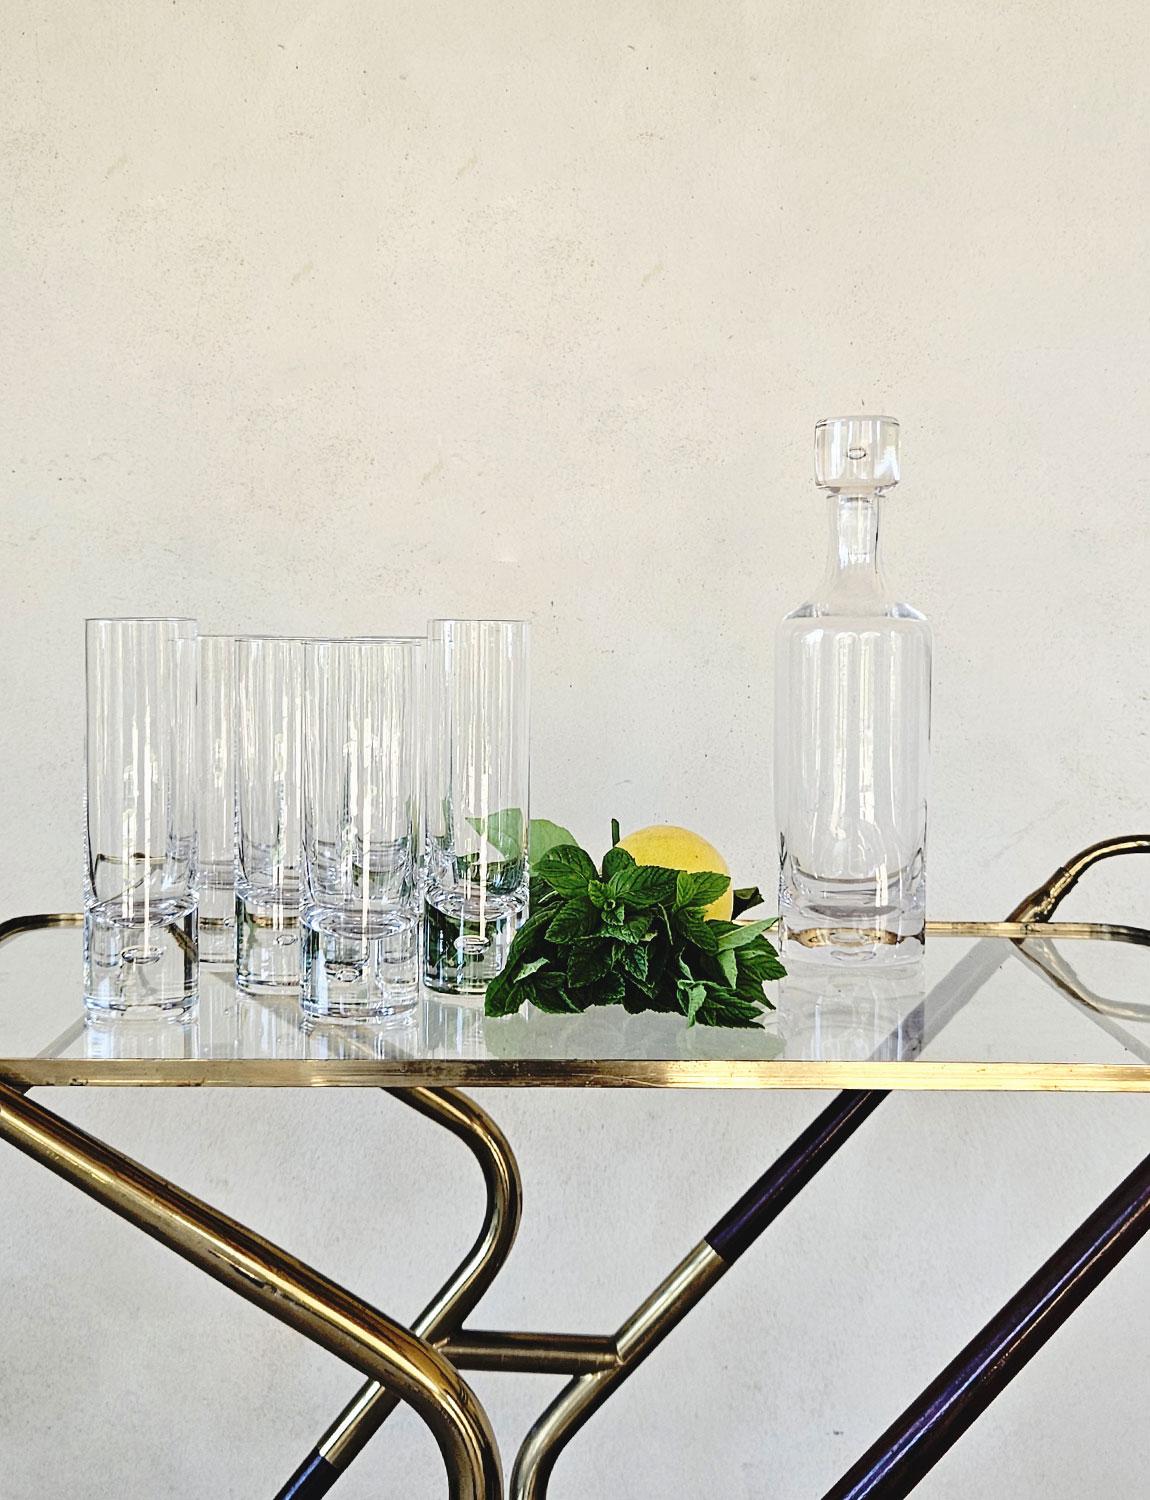 A set of six highball Italian aperitivo glasses each with large decorative air bubble in the base. The set comes with a matching heavy glass decanter with air bubble in the top. These types of glasses are typical of 1970s Italian bars serving